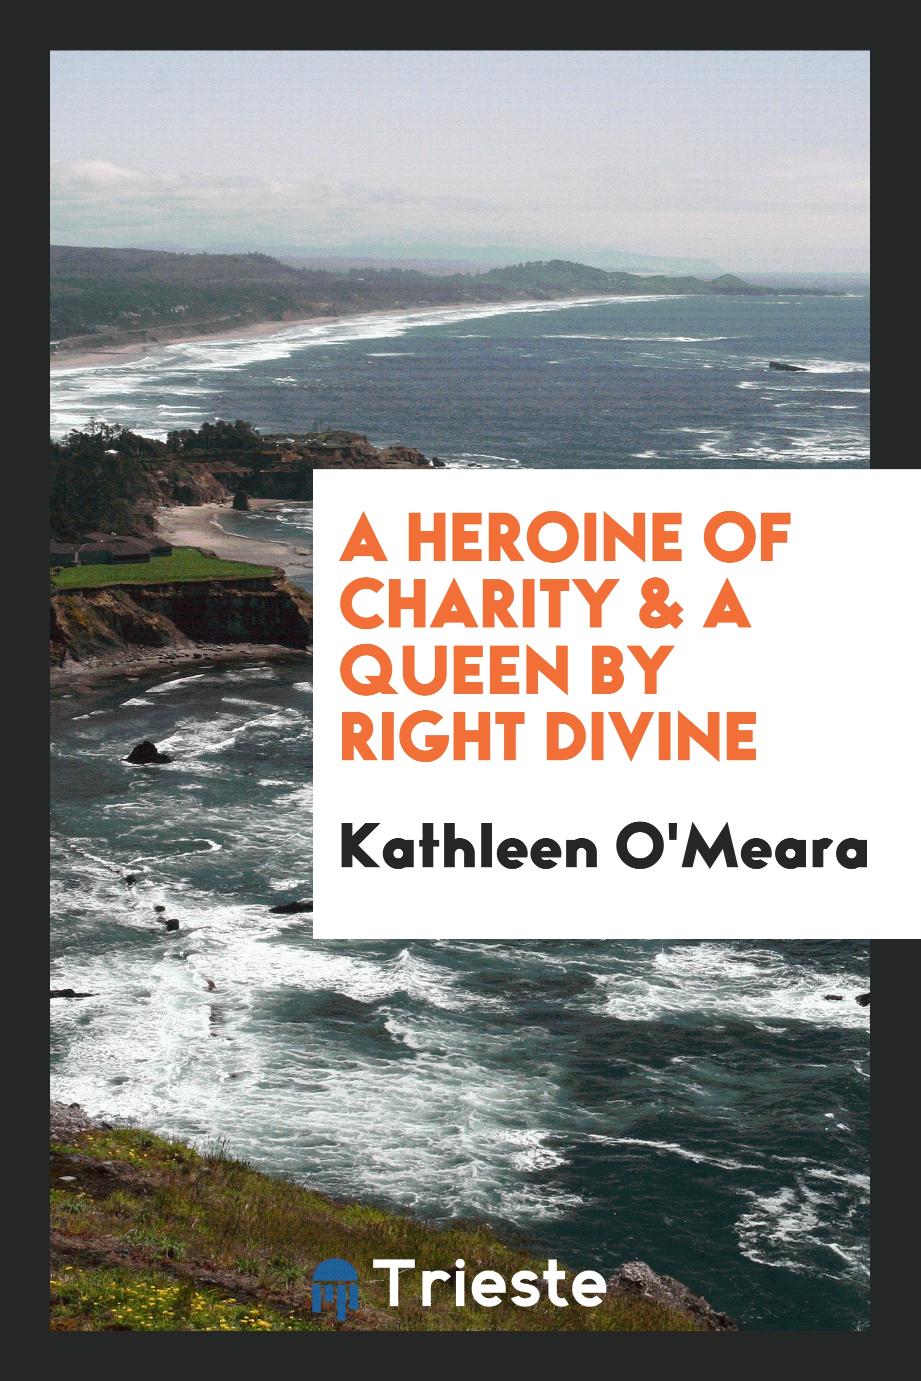 A heroine of charity & A queen by right divine